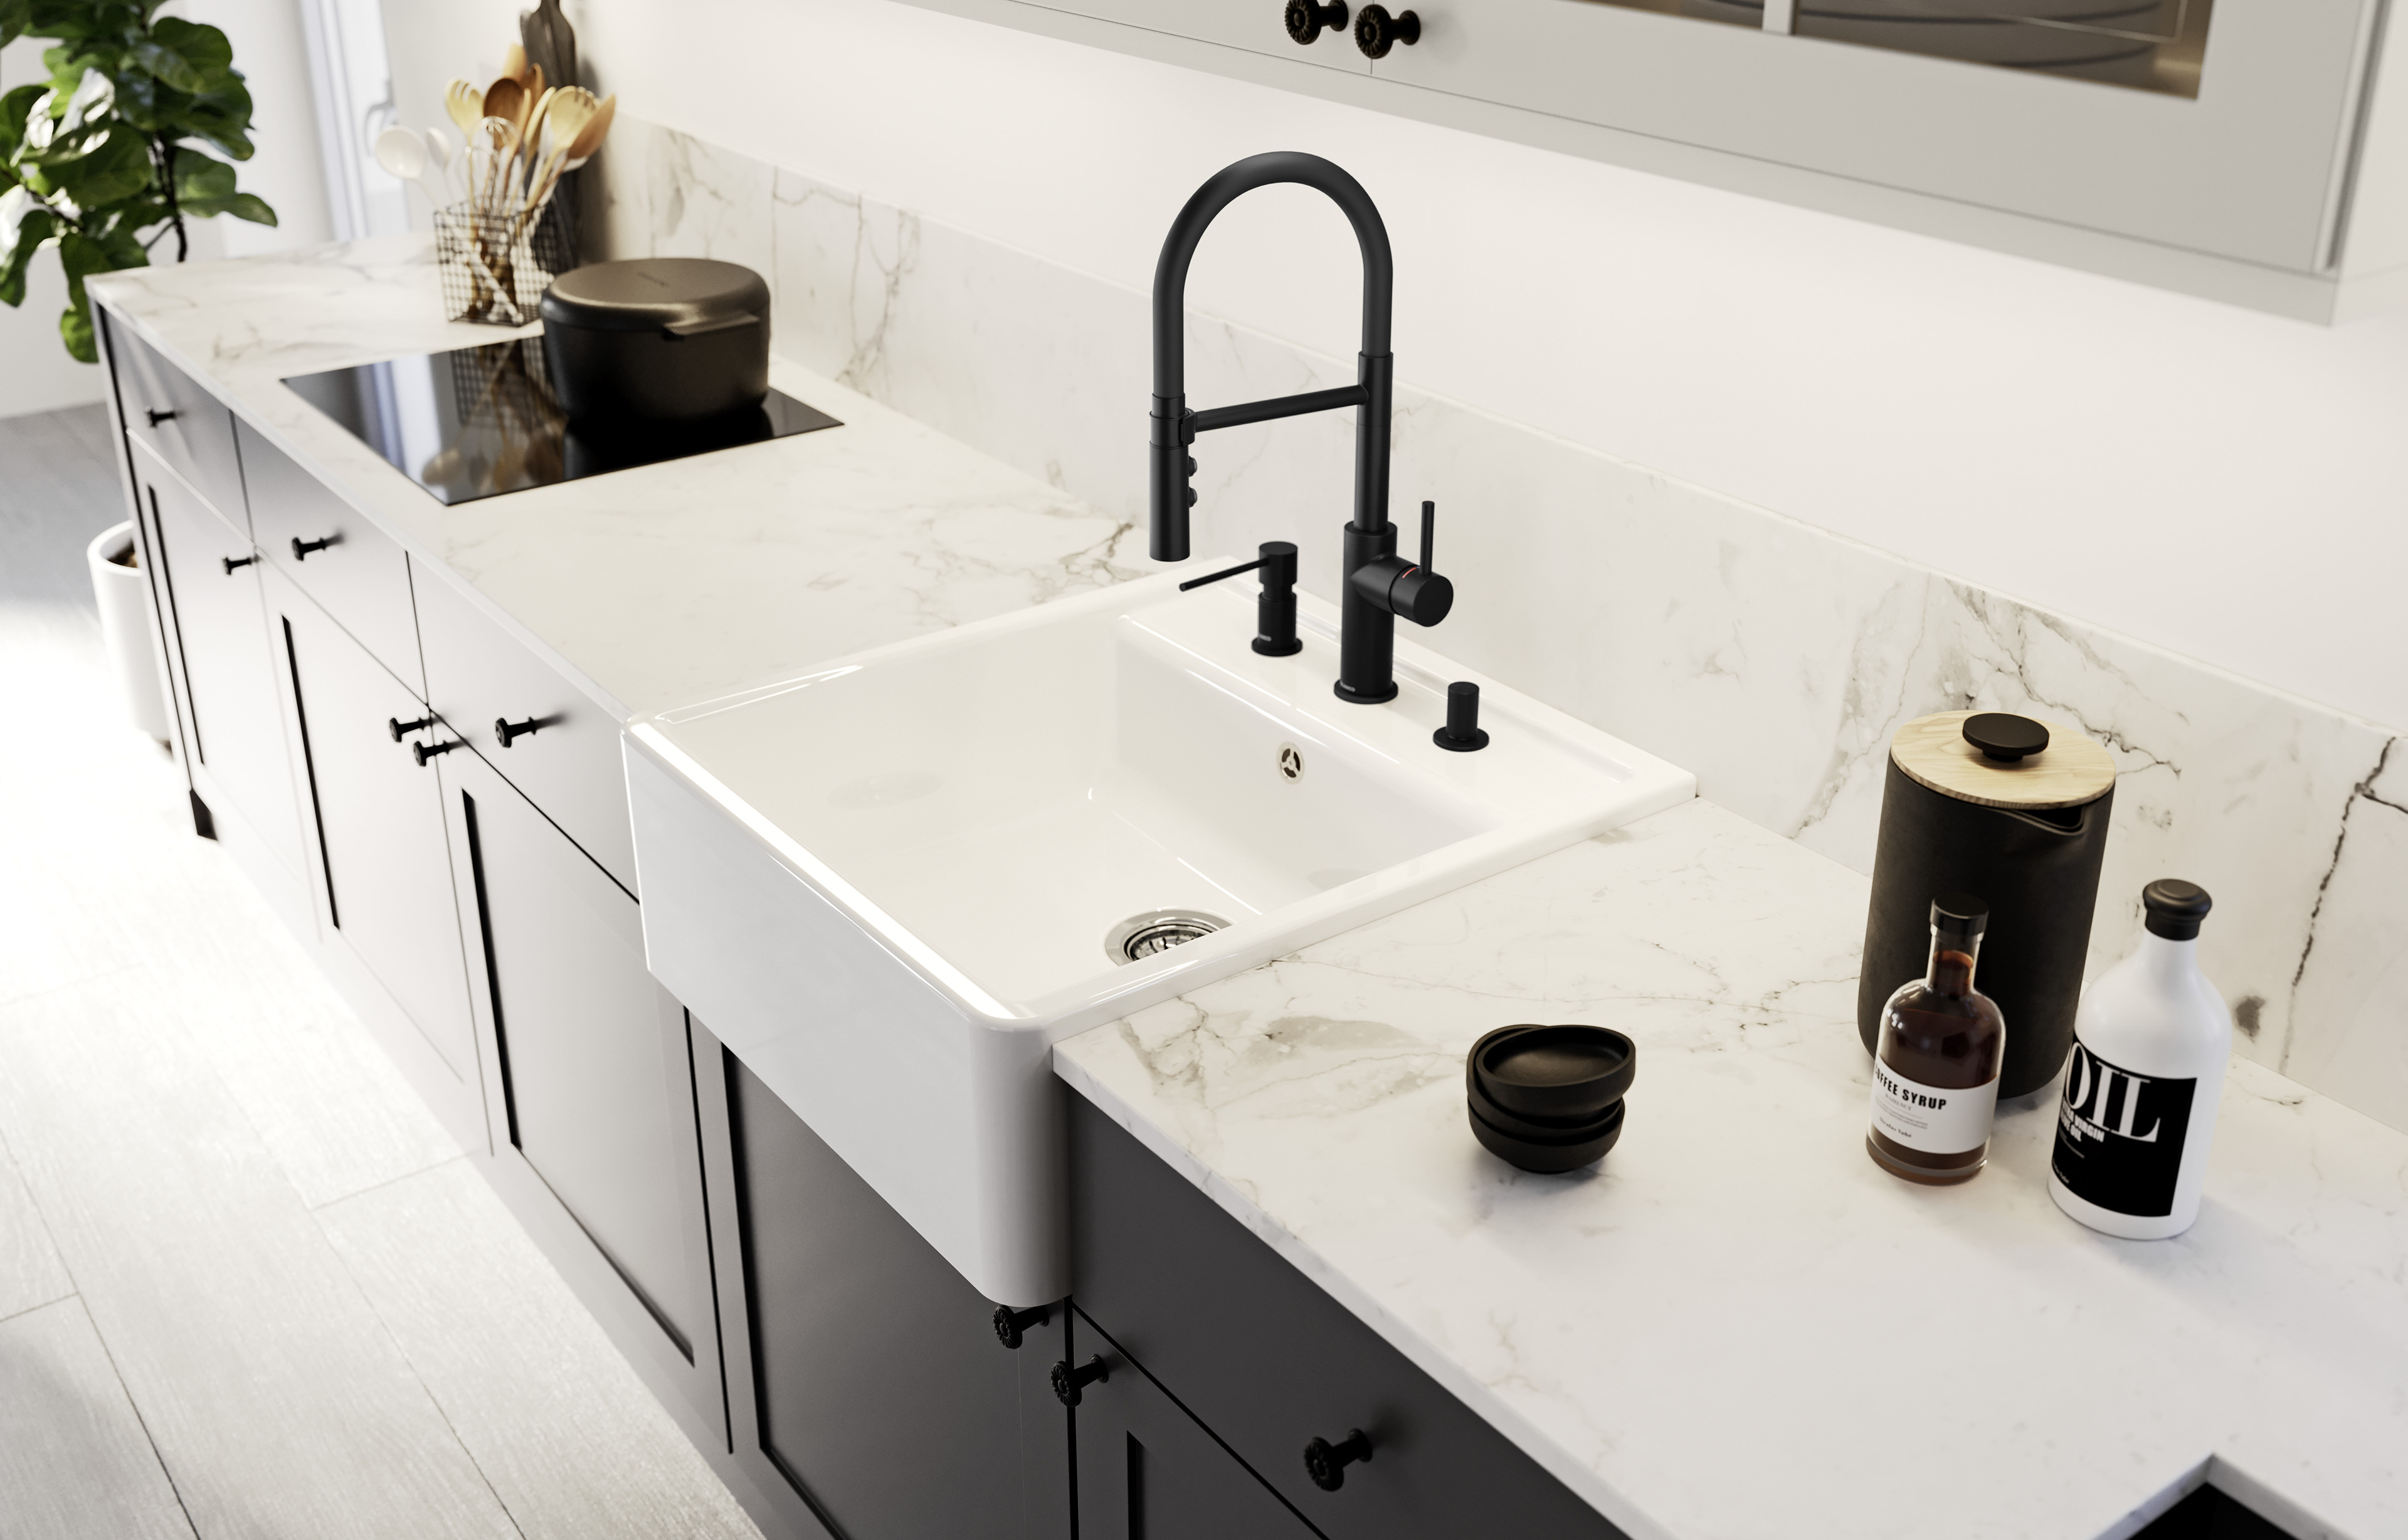 Your Ceramic sink as a workstation